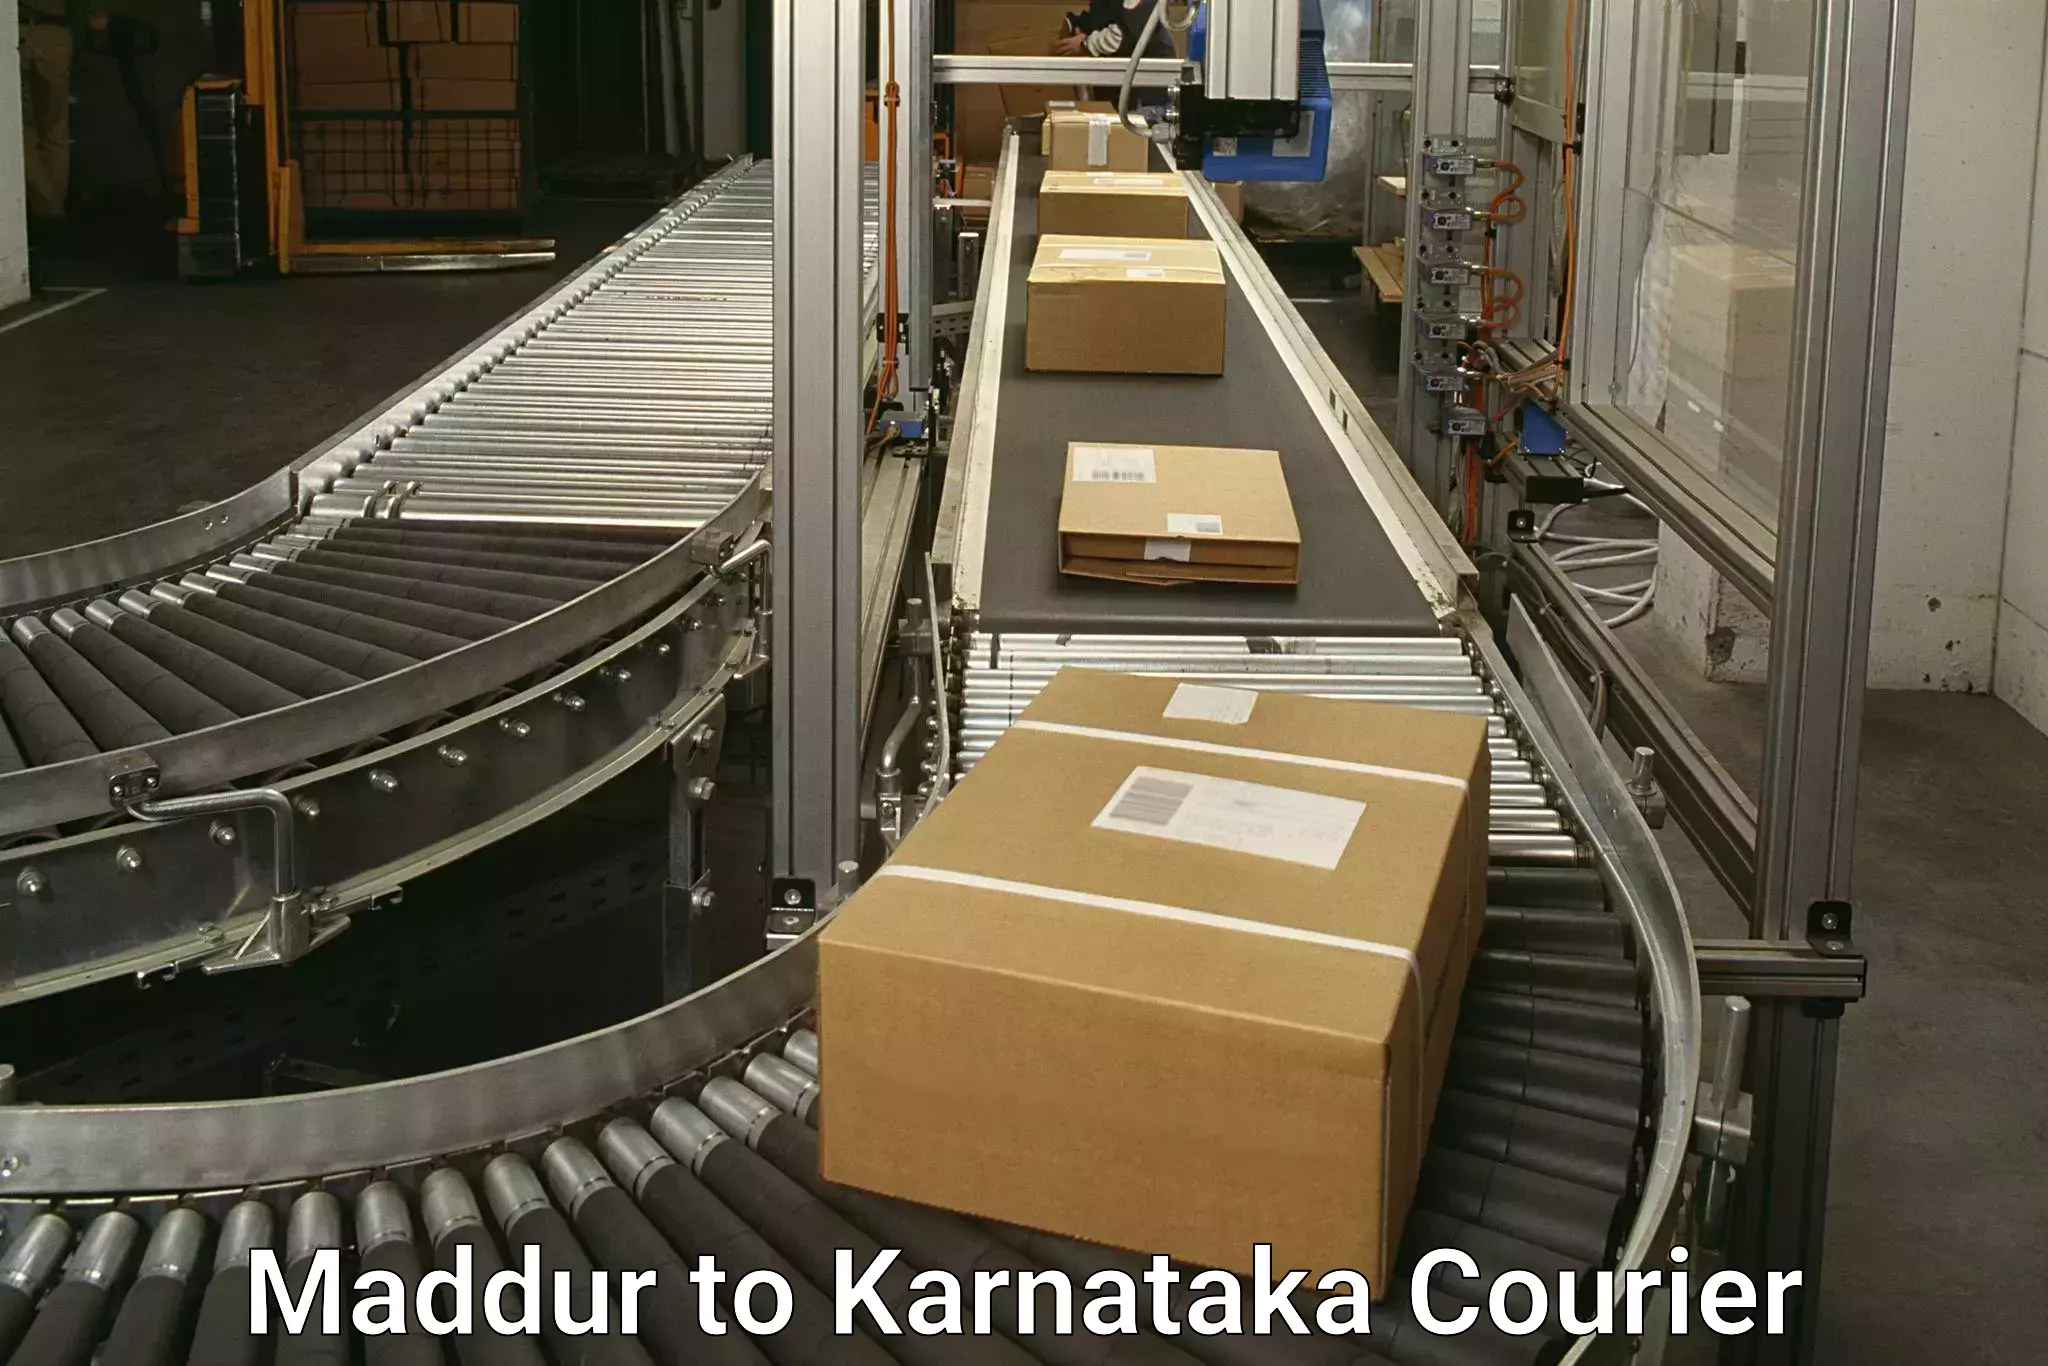 Customized delivery options Maddur to Kollegal